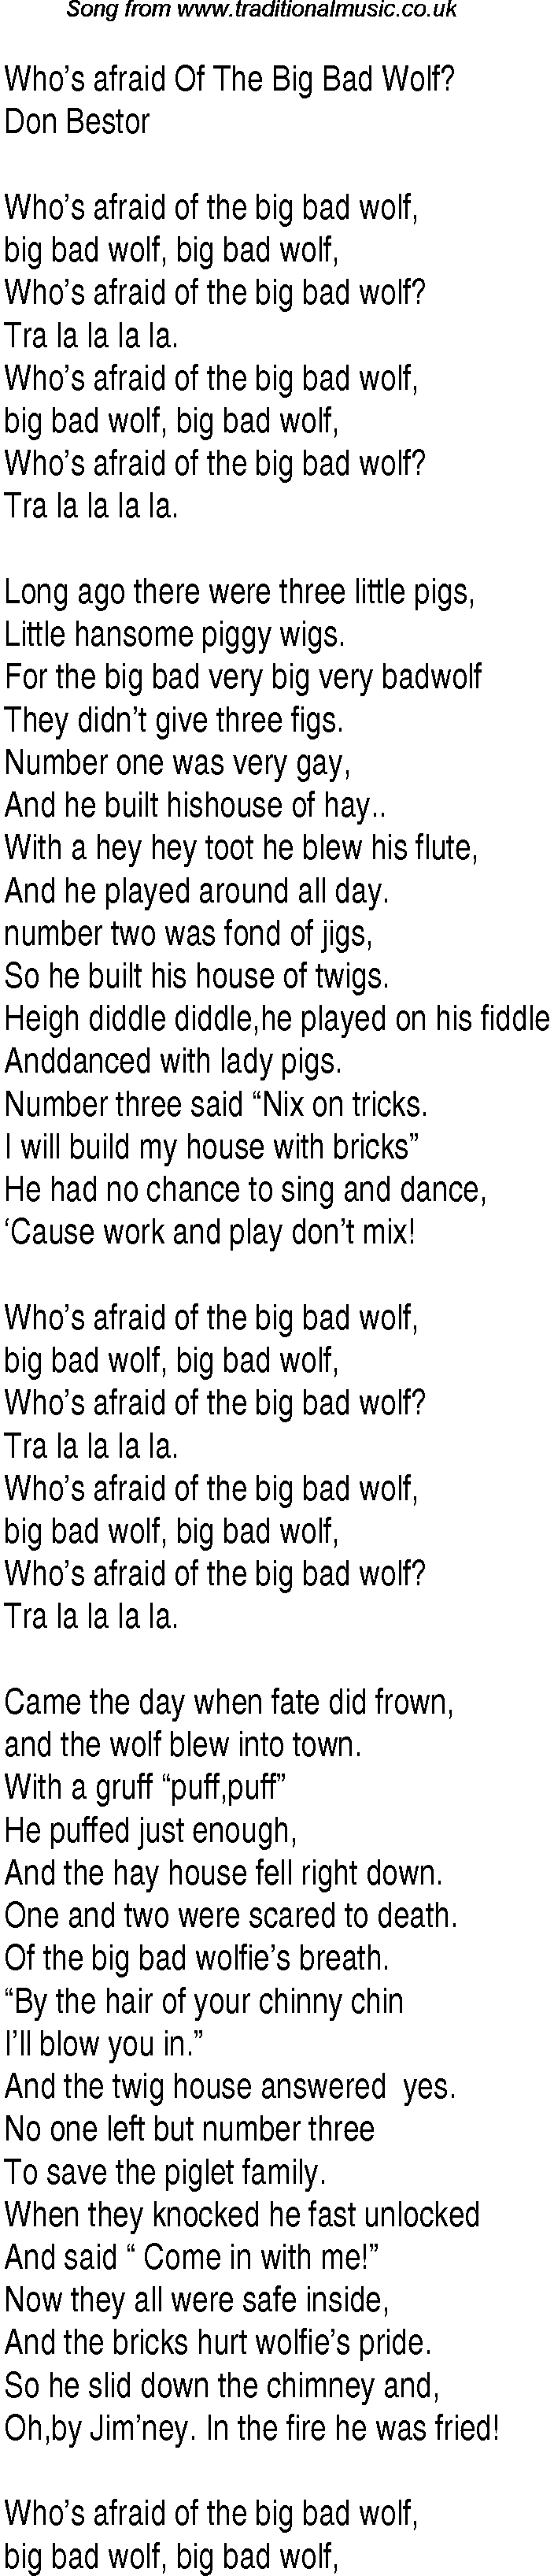 Music charts top songs 1933 - lyrics for Whos Afraid Of The Big Bad Wolf